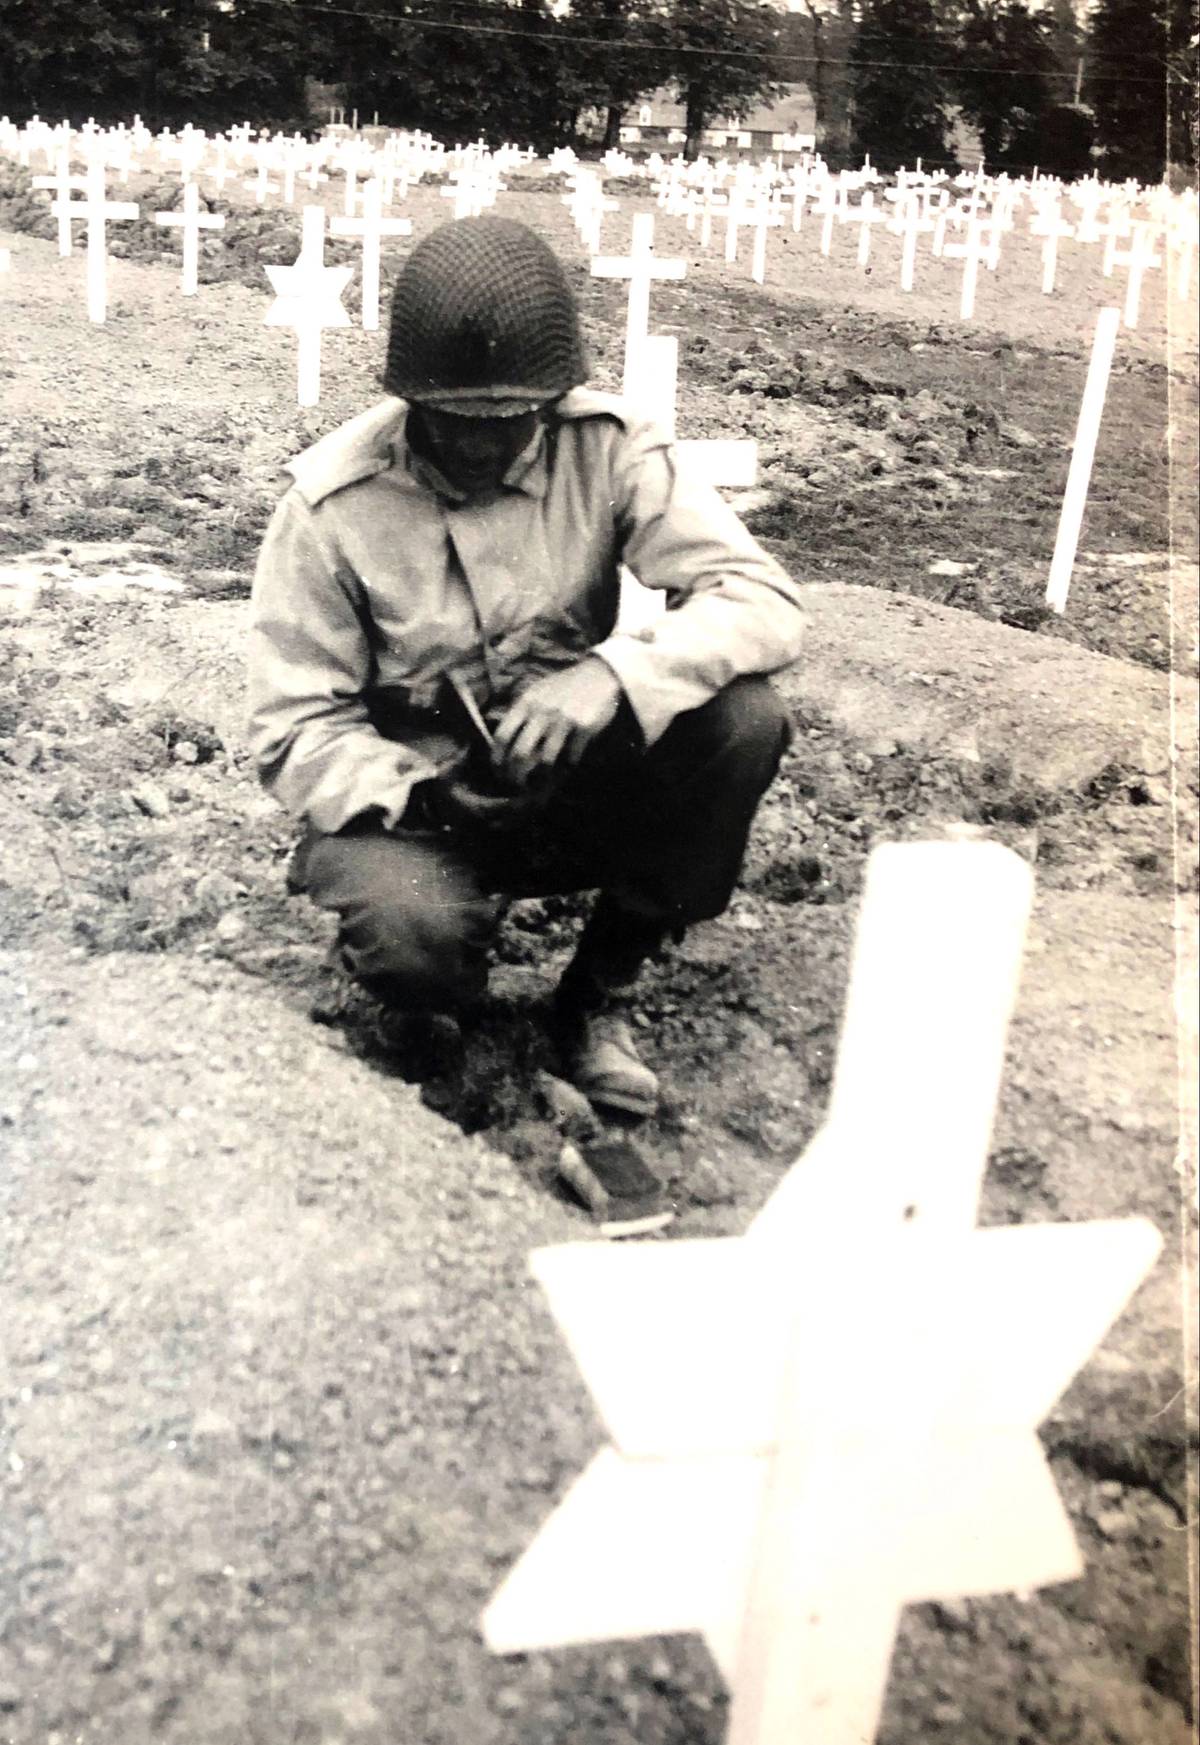 Meyer Birnbaum at his brother's grave, St. Laurent Cemetery, Normandy, July 1944